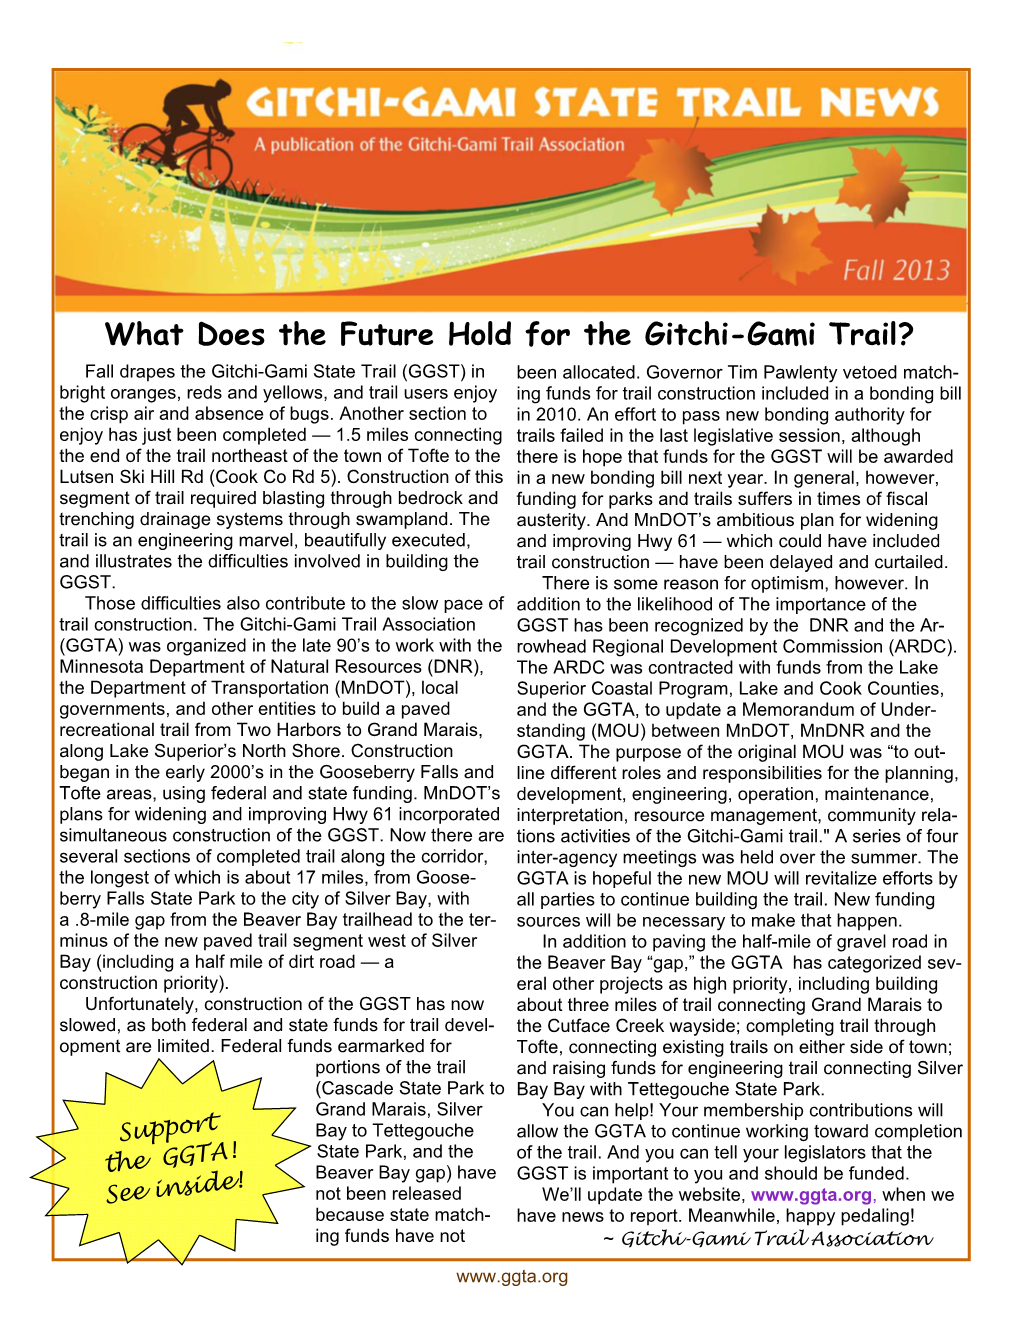 What Does the Future Hold for the Gitchi-Gami Trail? Fall Drapes the Gitchi-Gami State Trail (GGST) in Been Allocated